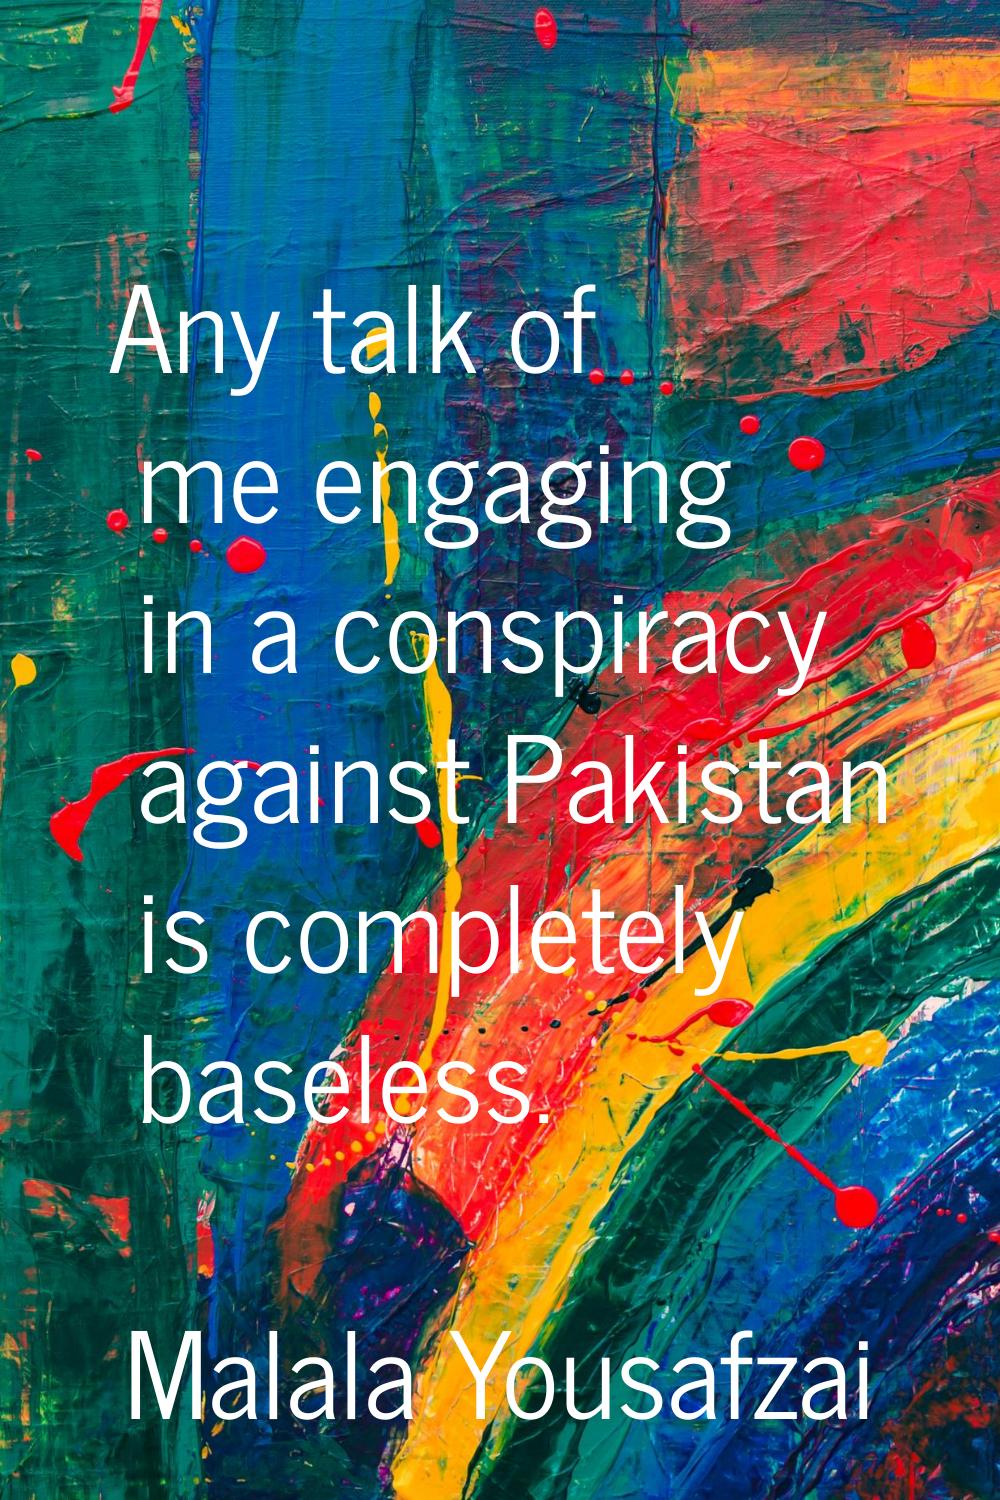 Any talk of me engaging in a conspiracy against Pakistan is completely baseless.